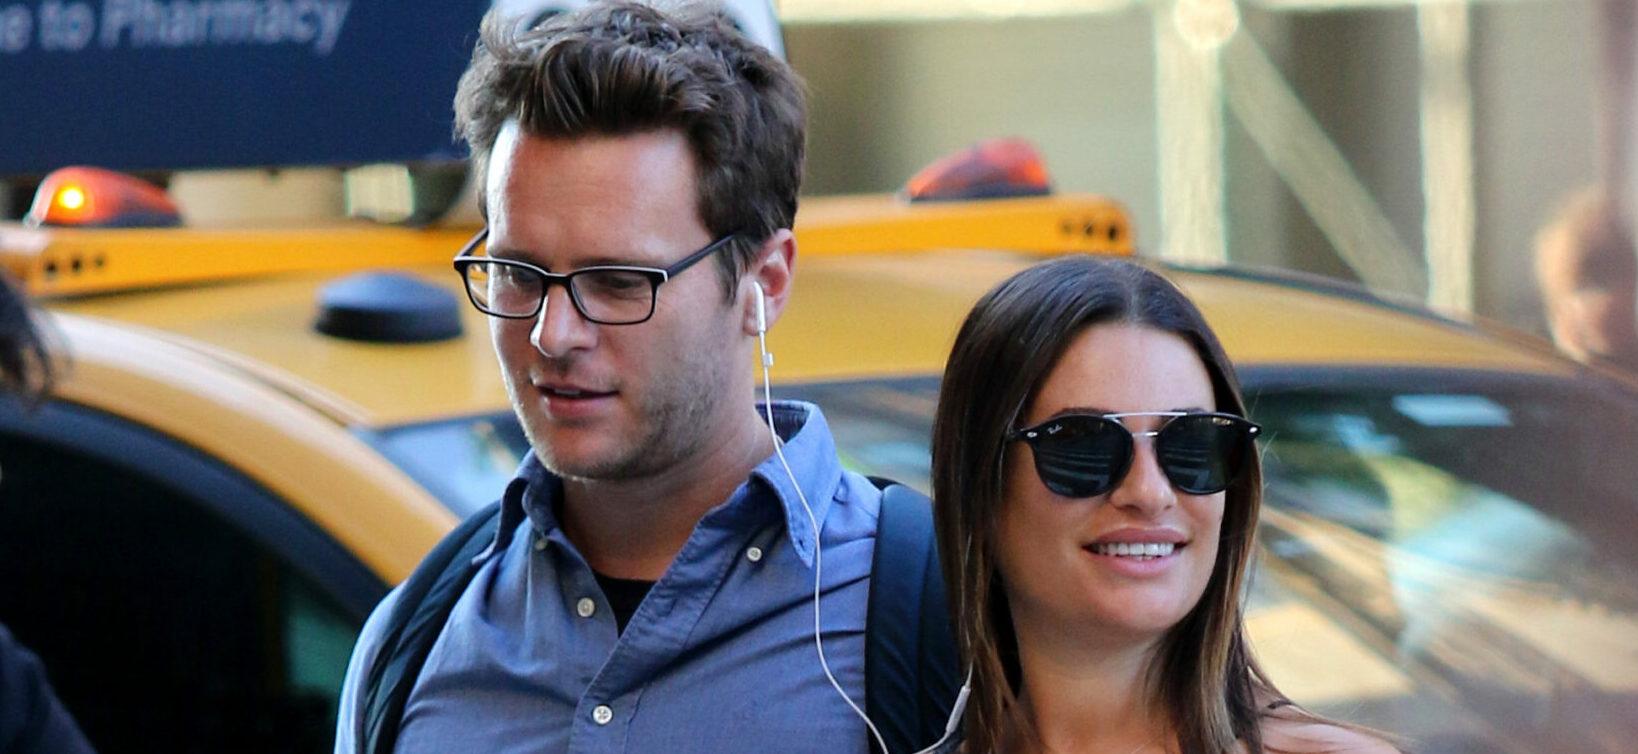 Lea Michele and BFF Jonathan Groff are all smiles while singing and dancing after watching Olivia Wilde's directed movie "Booksmart" at the Angelika Theatre in Downtown Manhattan. The "Glee" costars and best friends were seen enjoying the hot weather as they hugged and took selfies together while later on holding hands and sharing ear headphones as they listened to music in which they were both singing and dancing along on the streets of Manhattan. 27 Jun 2019 Pictured: Lea Michele and Jonathan Groff.